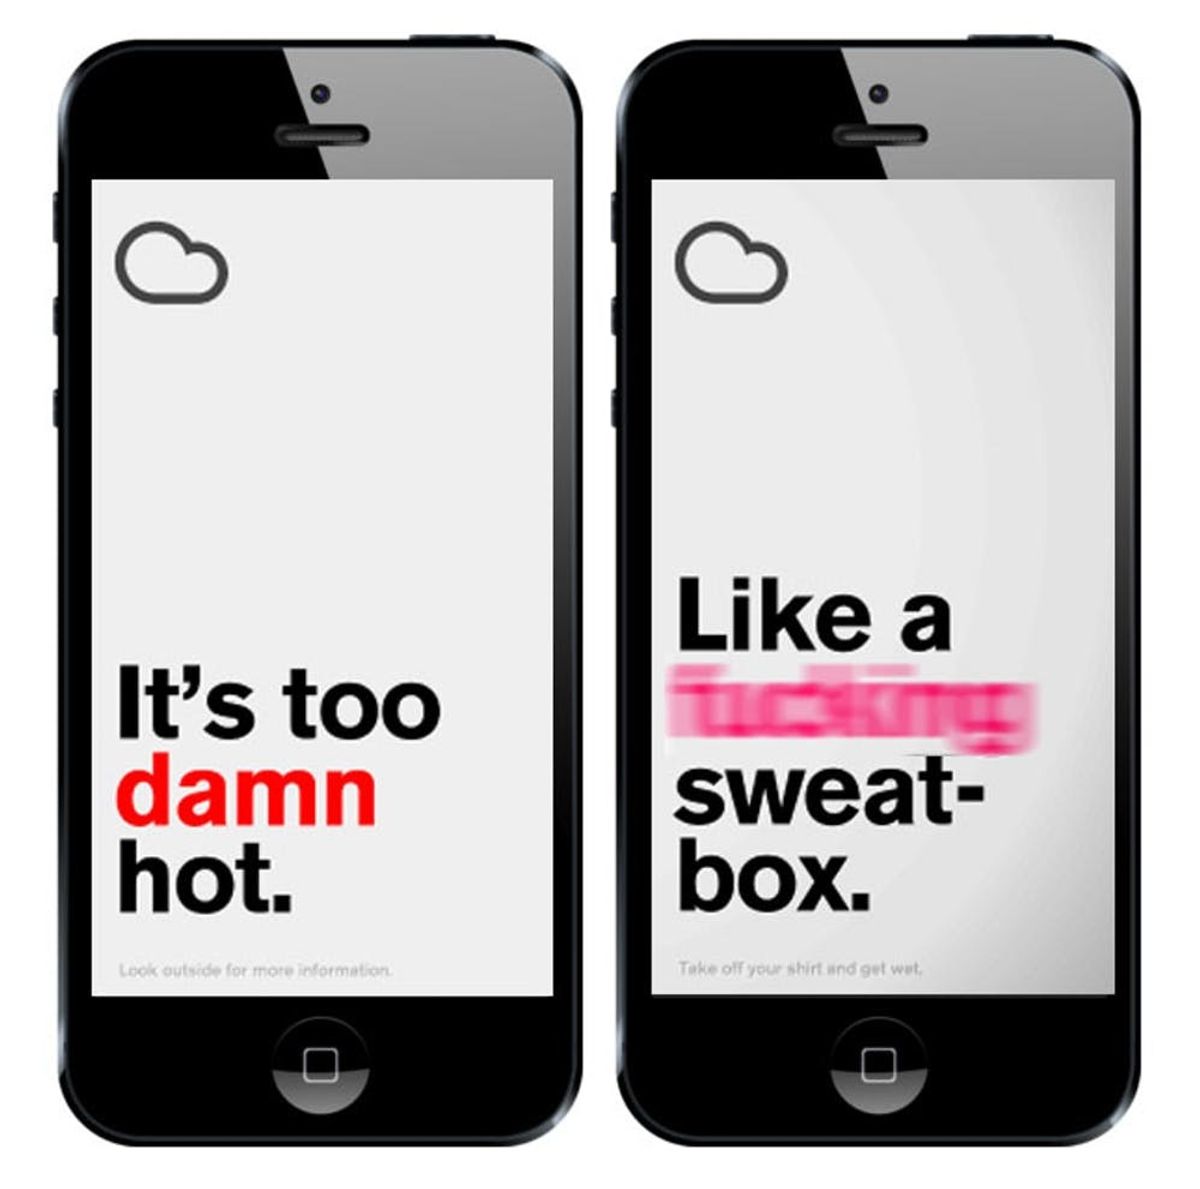 Excuse Our Language, But This is an F-ing Authentic Weather App